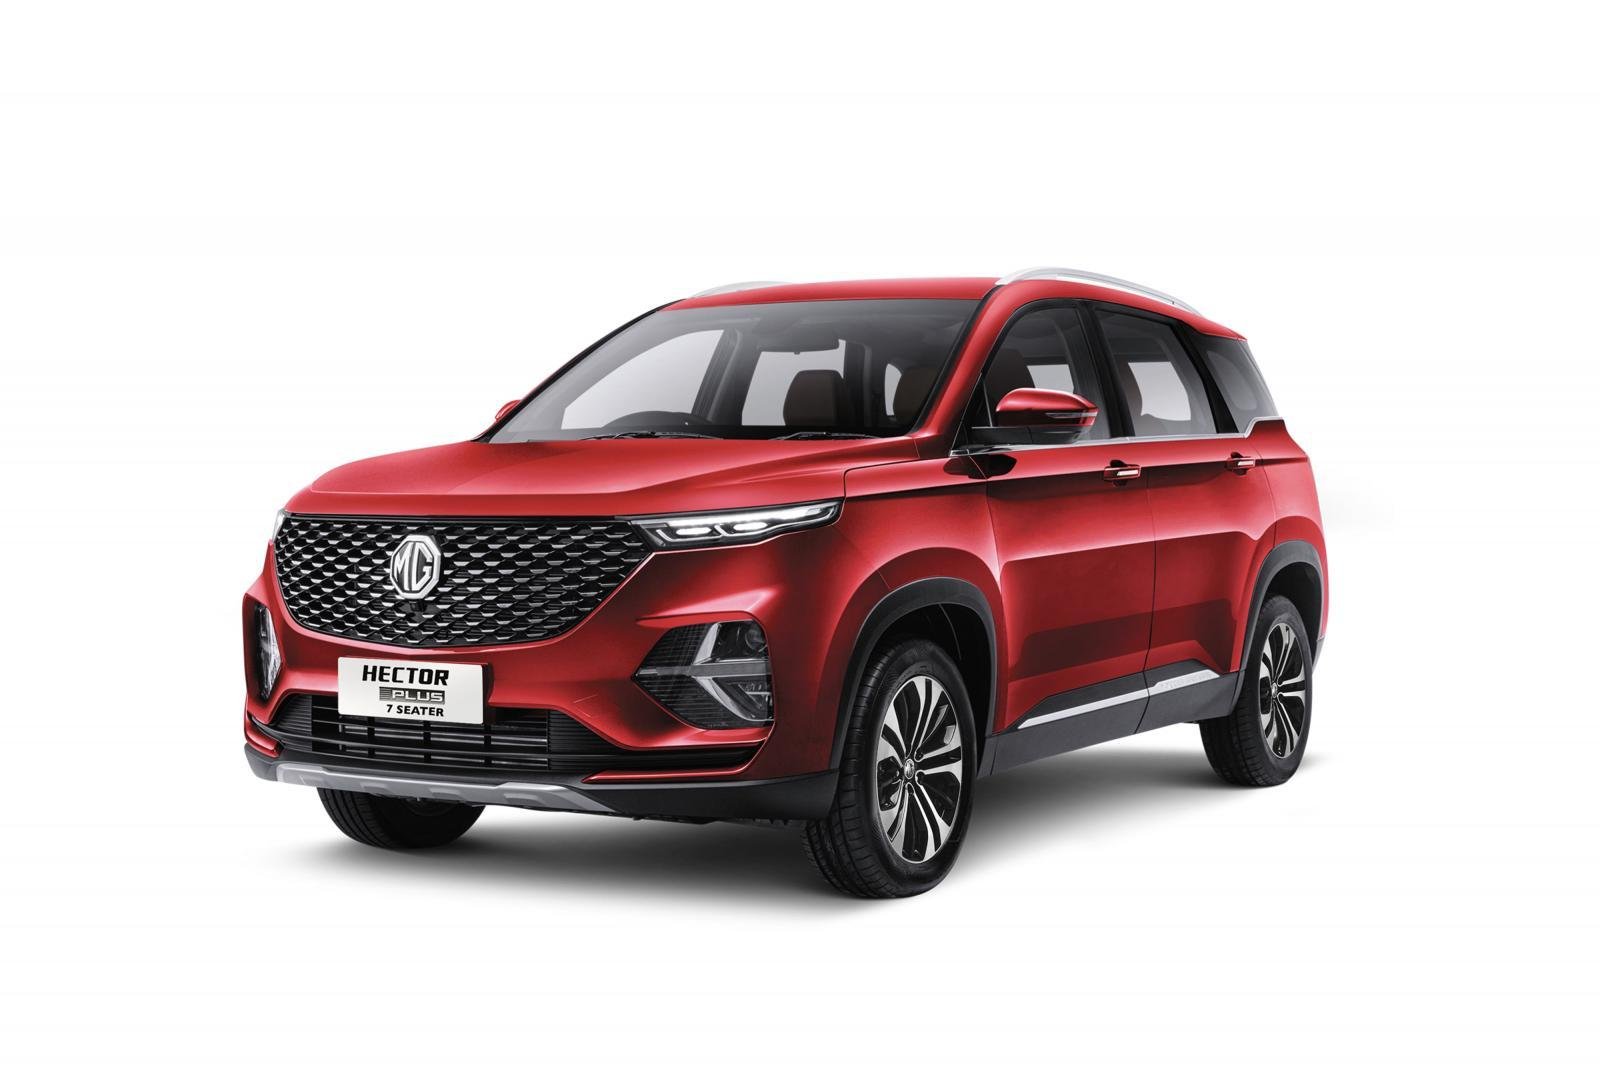 7-Seater MG Hector Plus Goes On Sale Before Tata Safari Launch